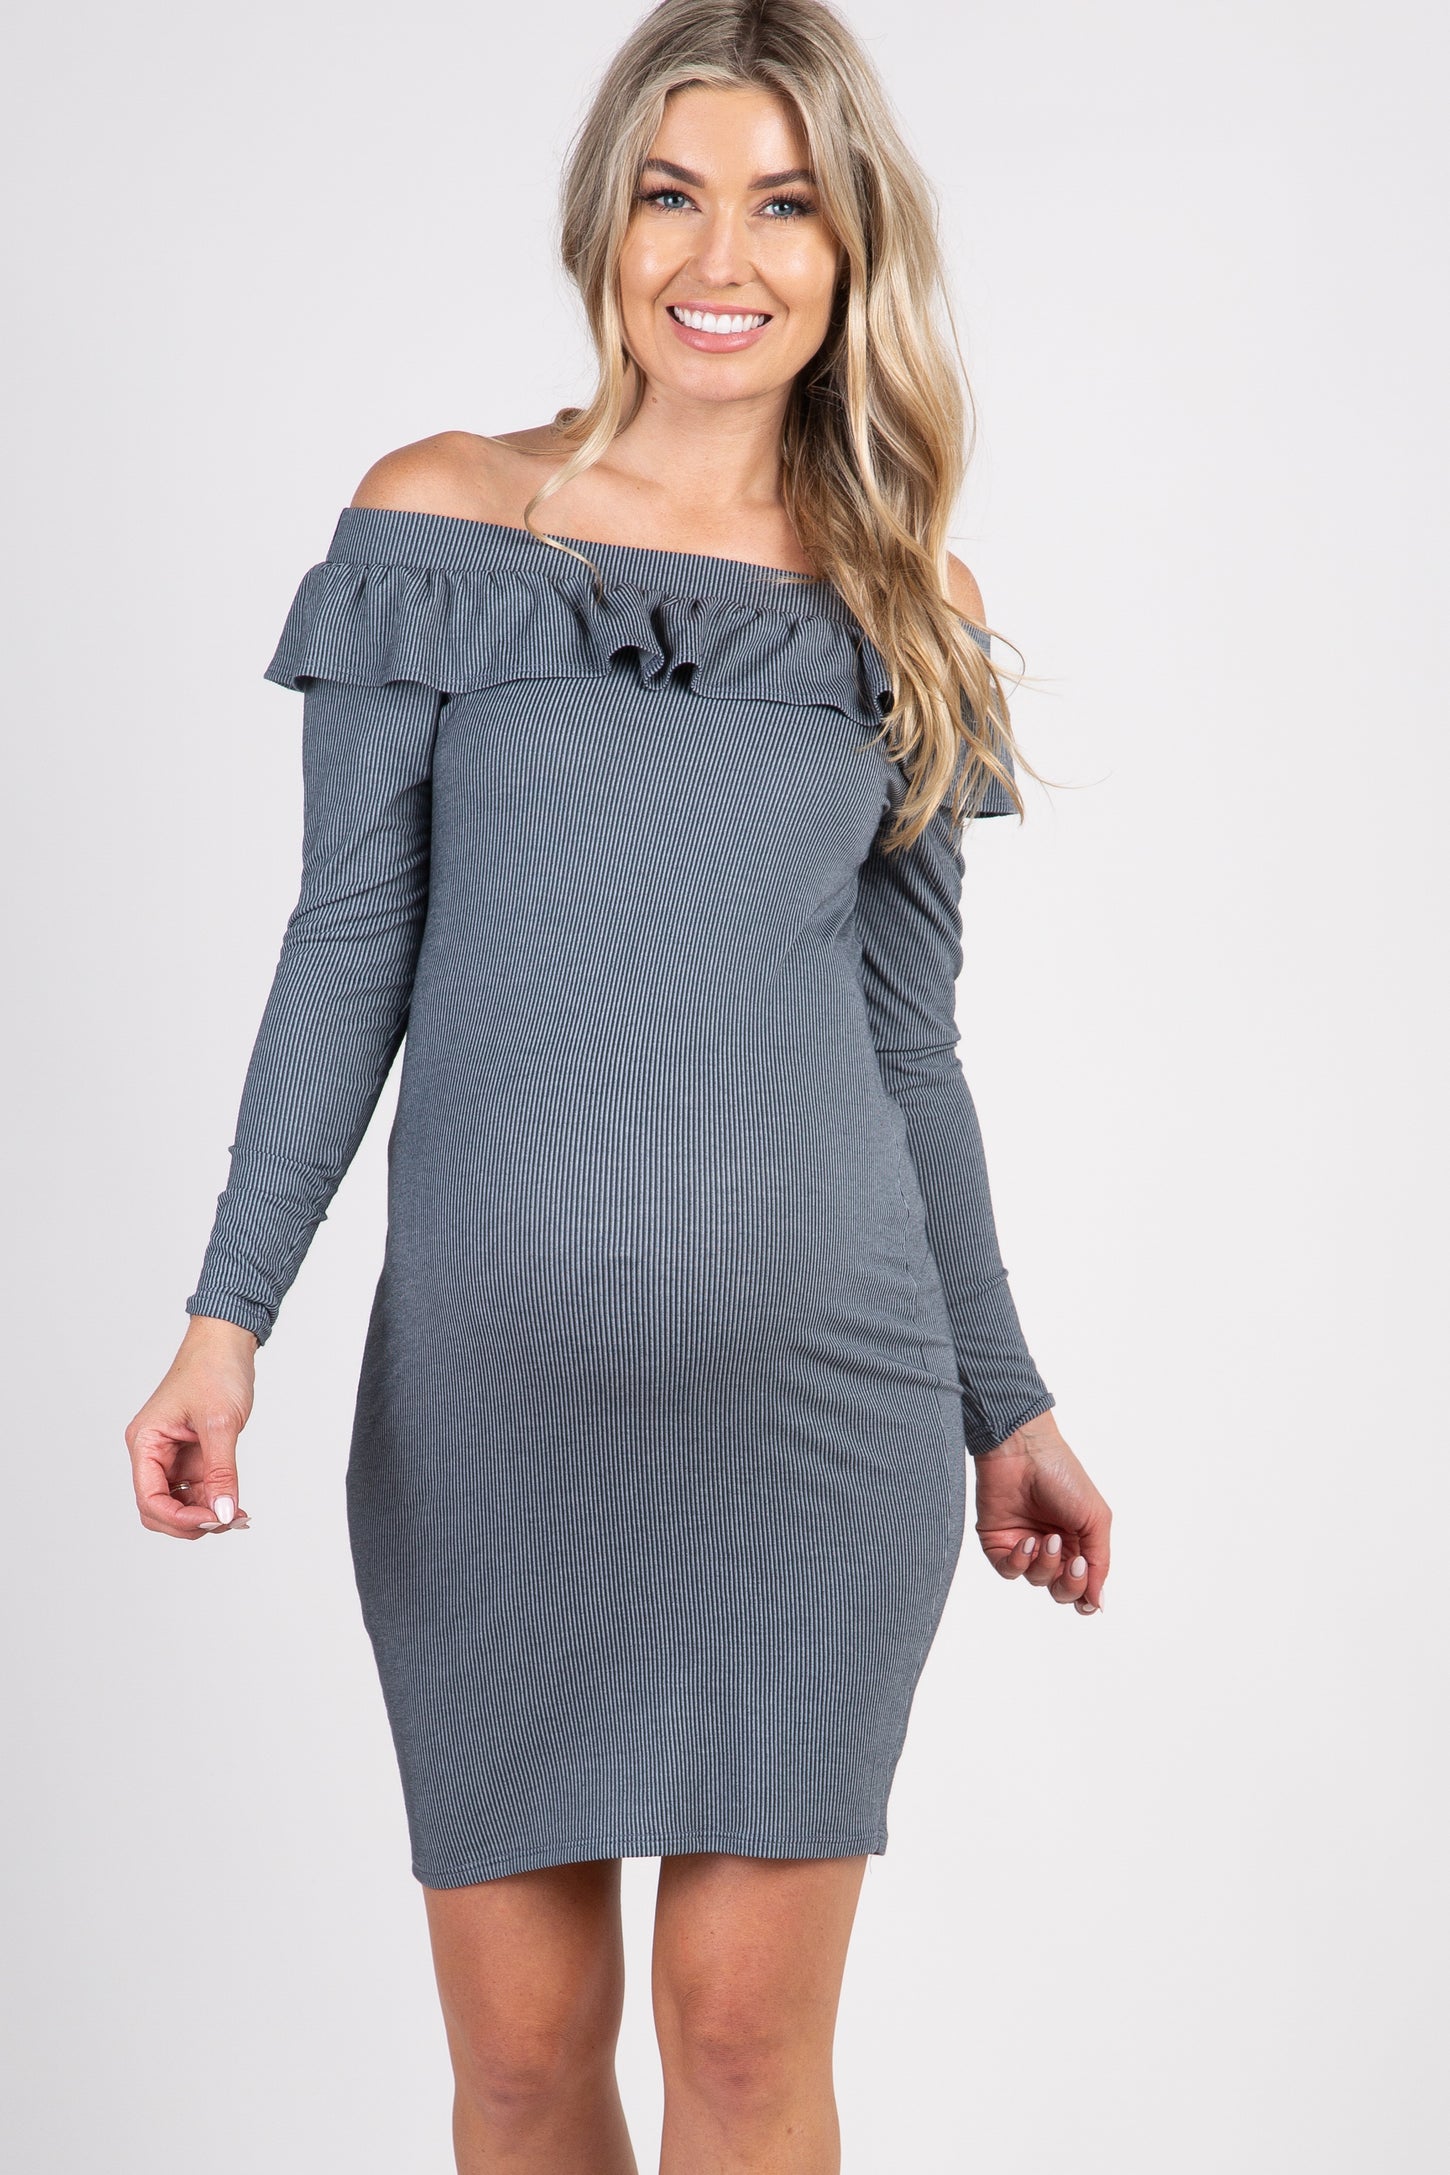 Charcoal Pinstriped Off Shoulder Ruffle Accent Maternity Dress